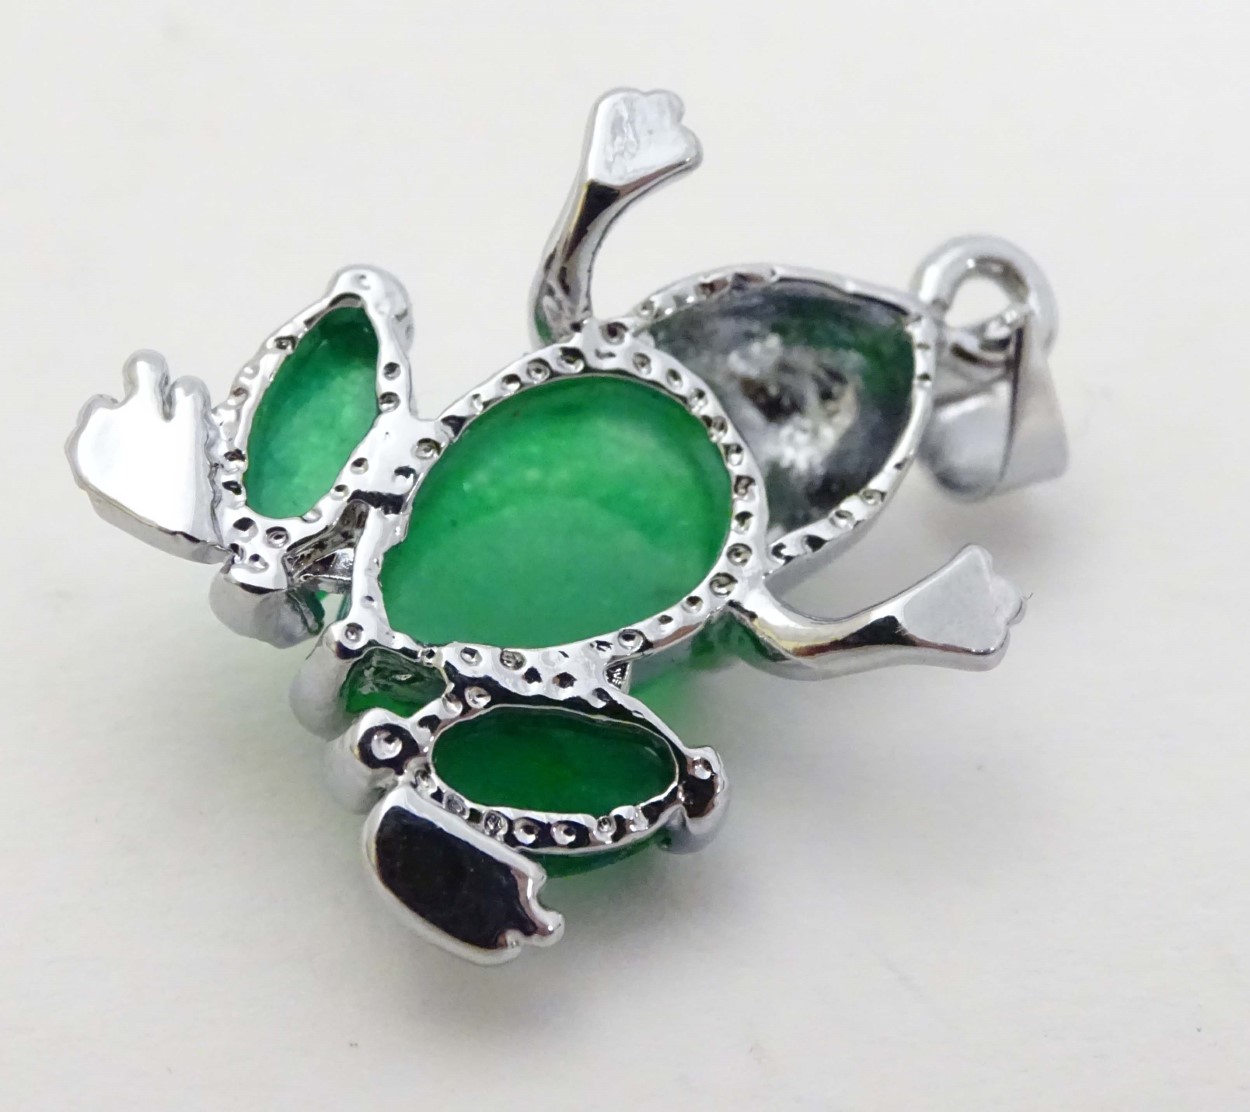 A white metal pendant formed as a frog set with green jade like cabochon 1" long - Image 2 of 6